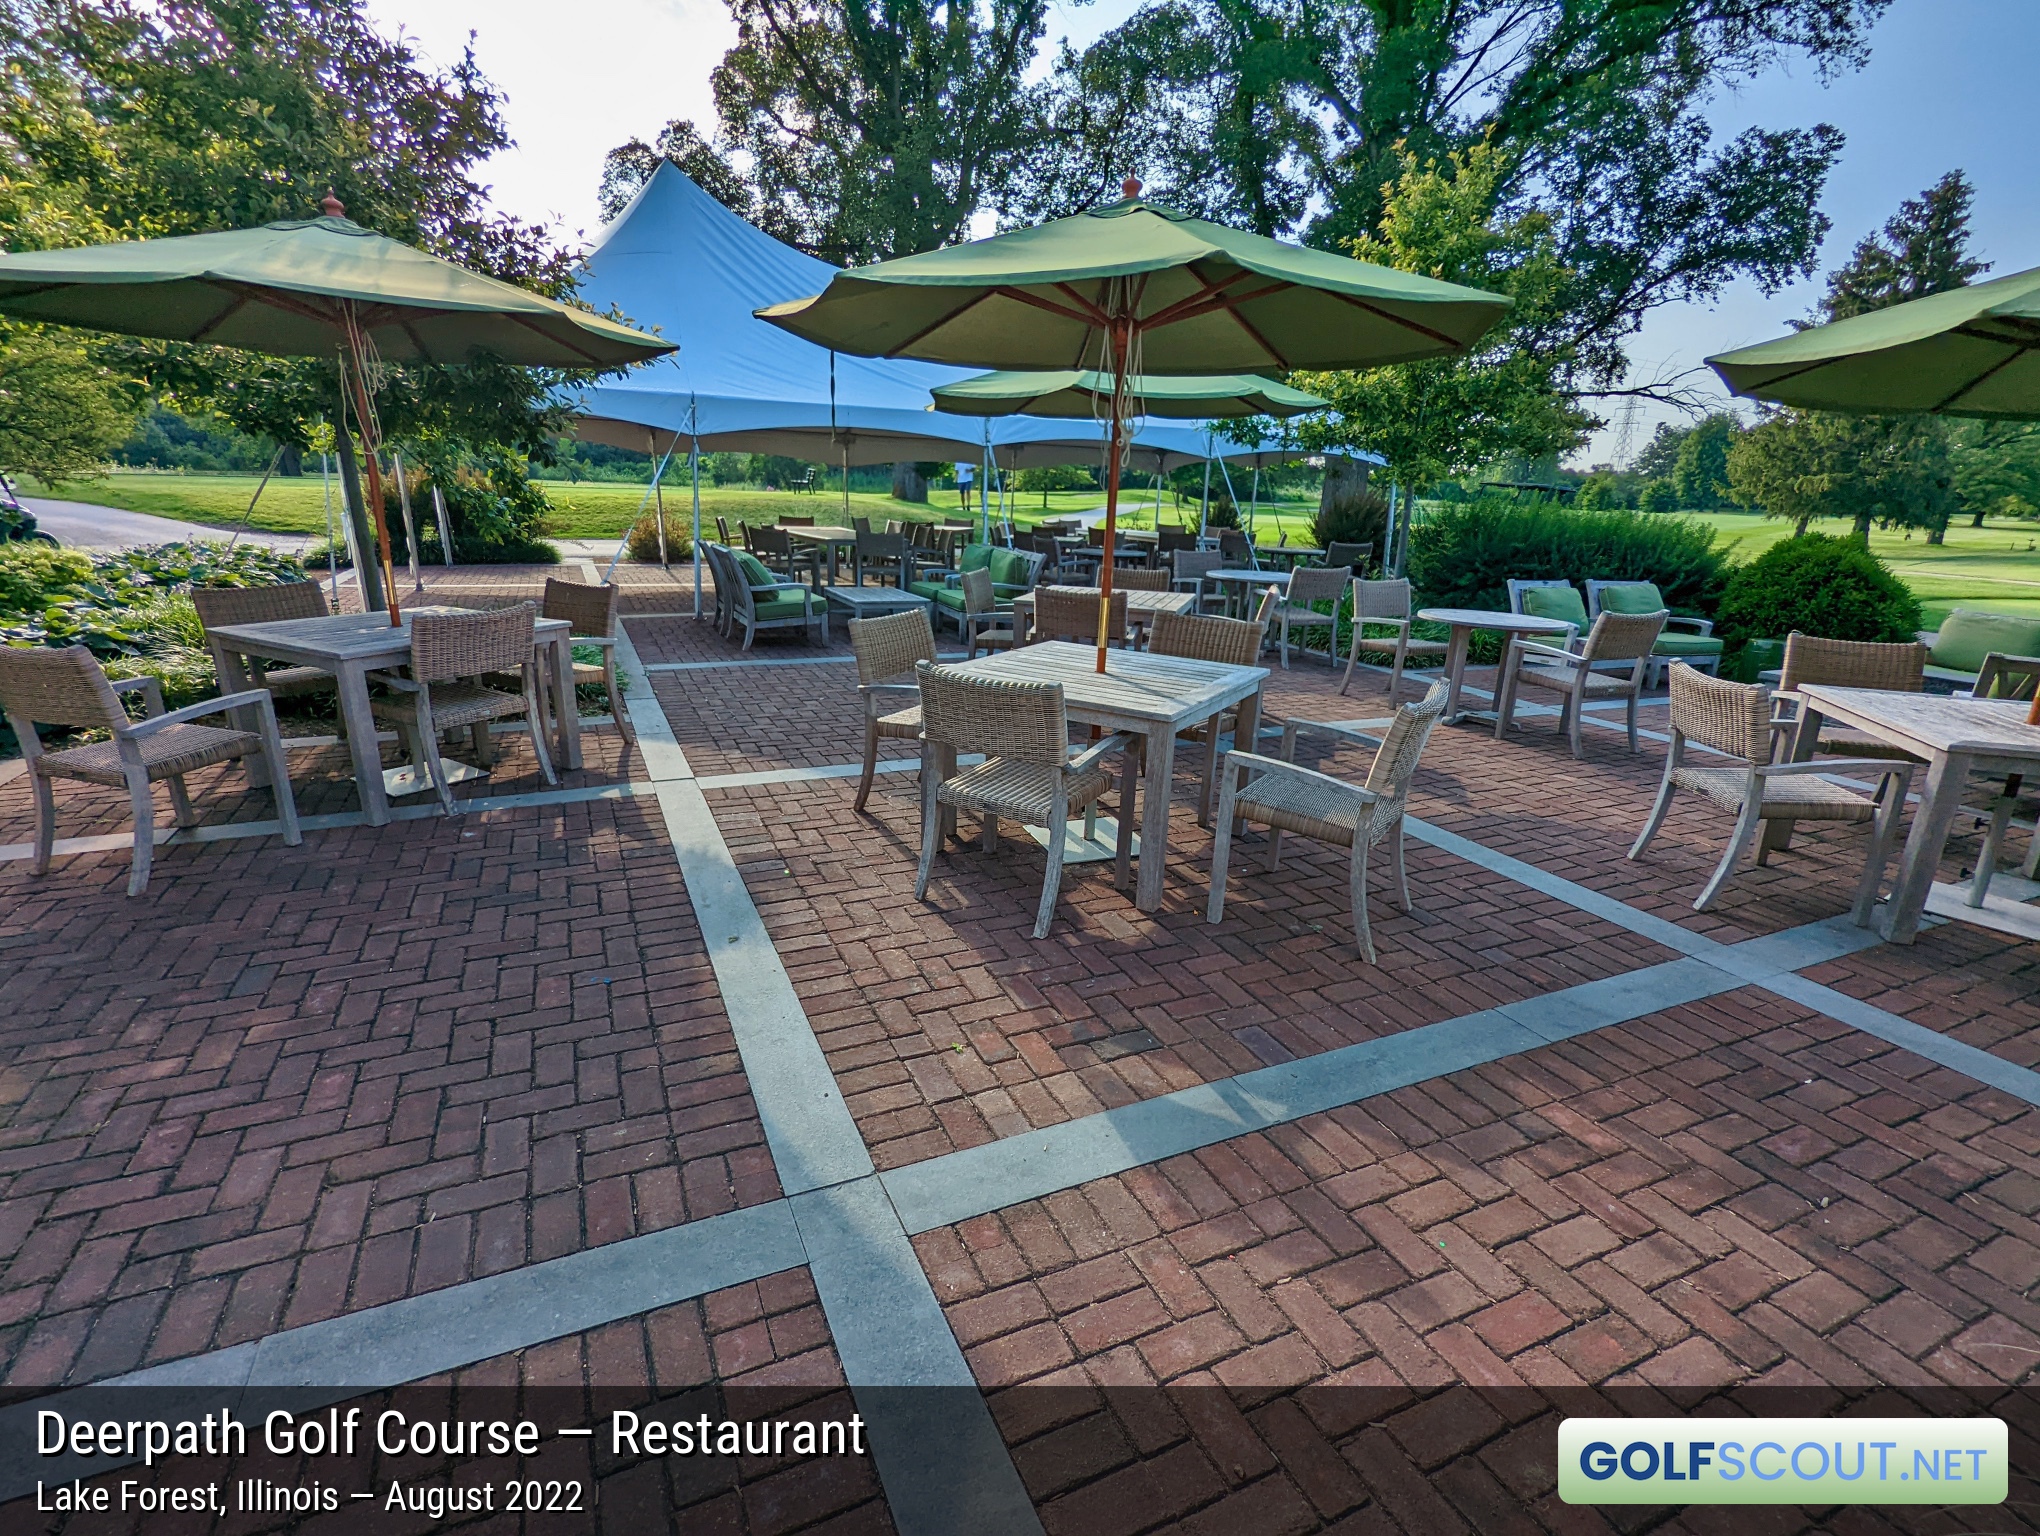 Photo of the restaurant at Deerpath Golf Course in Lake Forest, Illinois. 